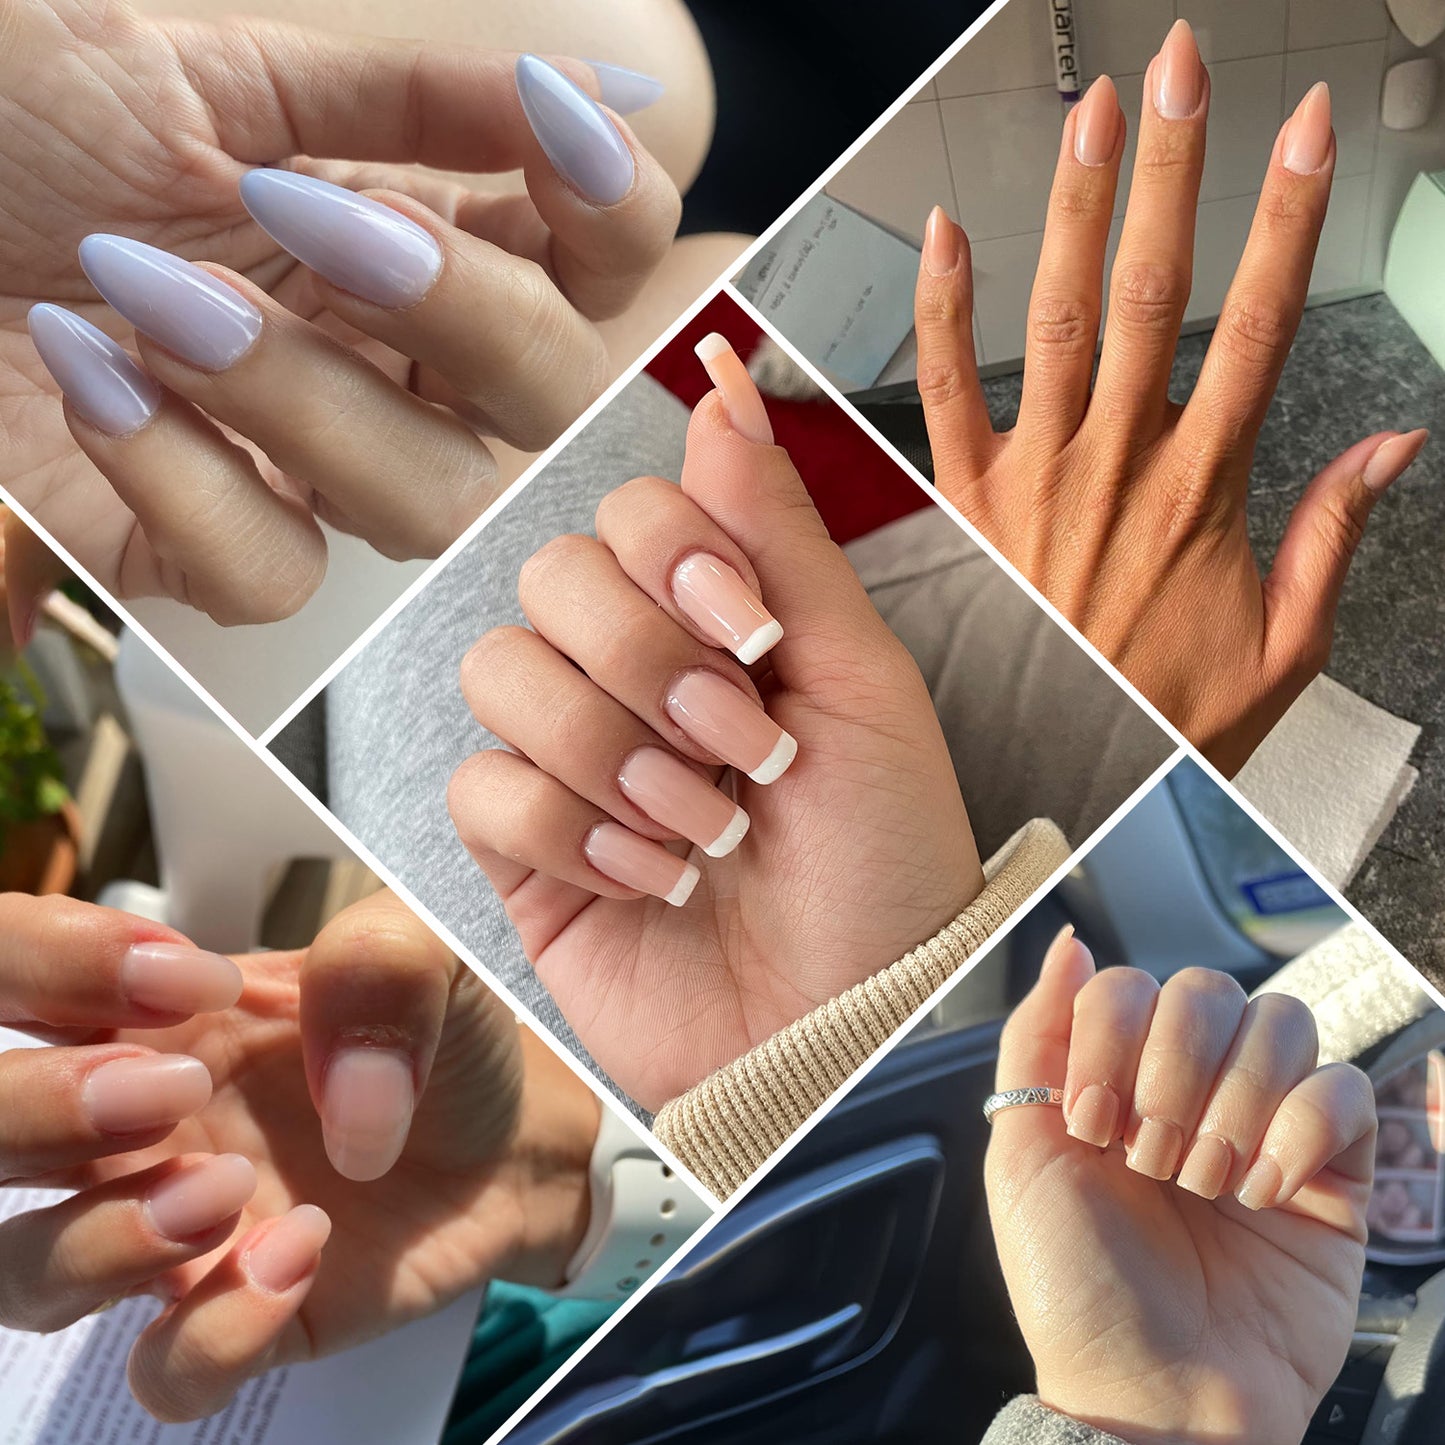 A collage of photos showing people's nails after using Polygel expert Kit. The nails look shiny and polished.